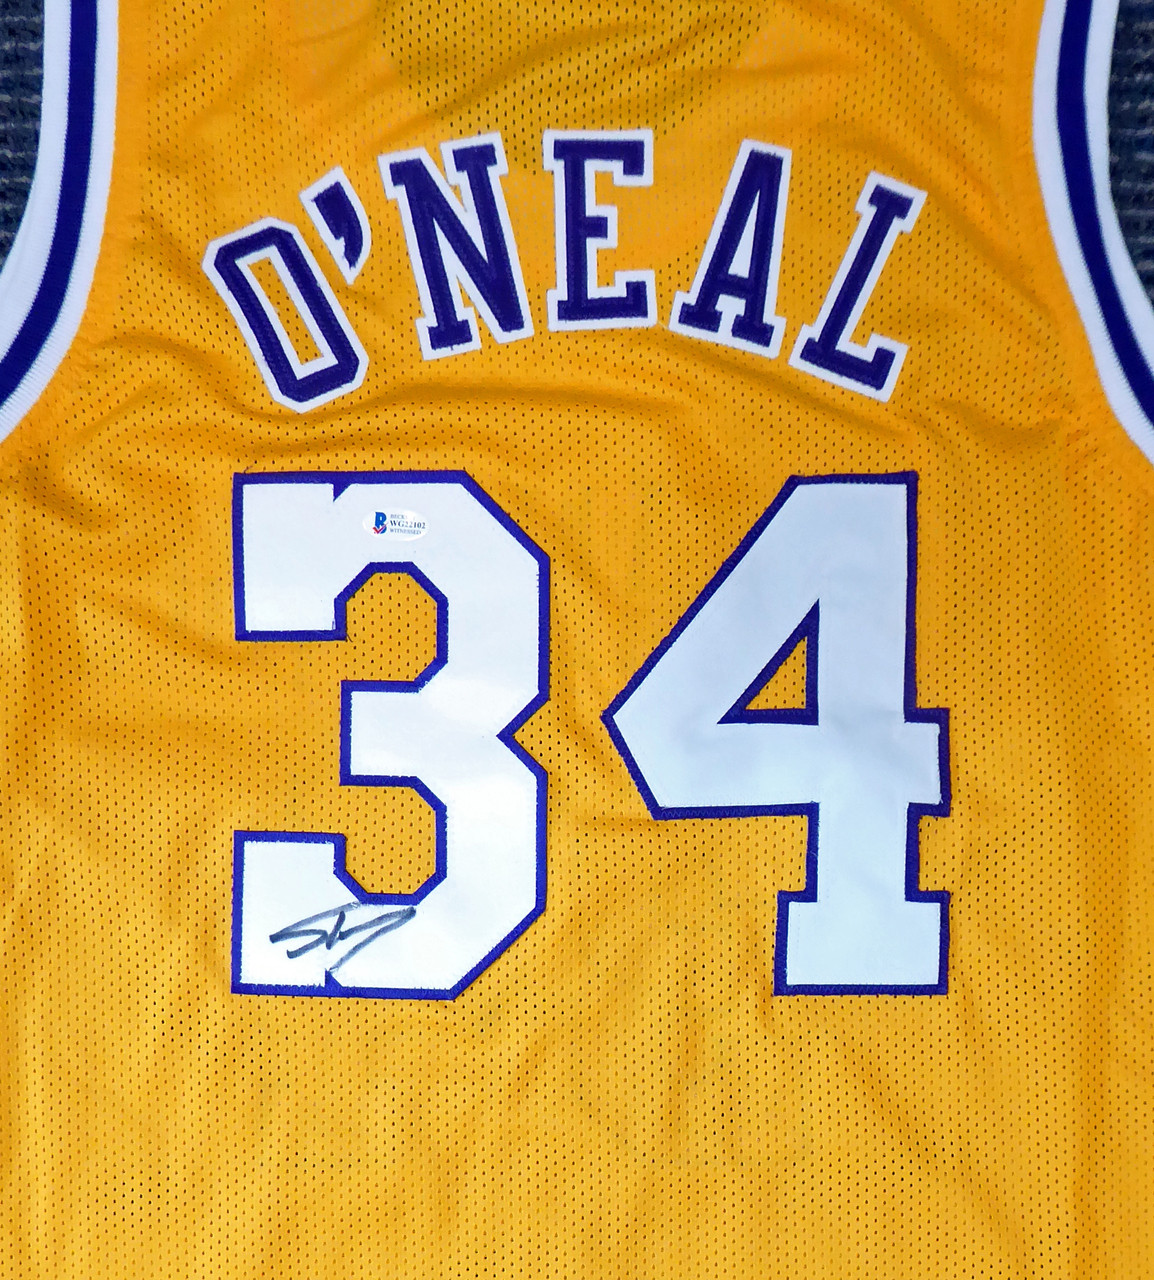 Shaquille O'Neal Signed Los Angeles Lakers Mitchell & Ness Gold NBA  Swingman Basketball Jersey